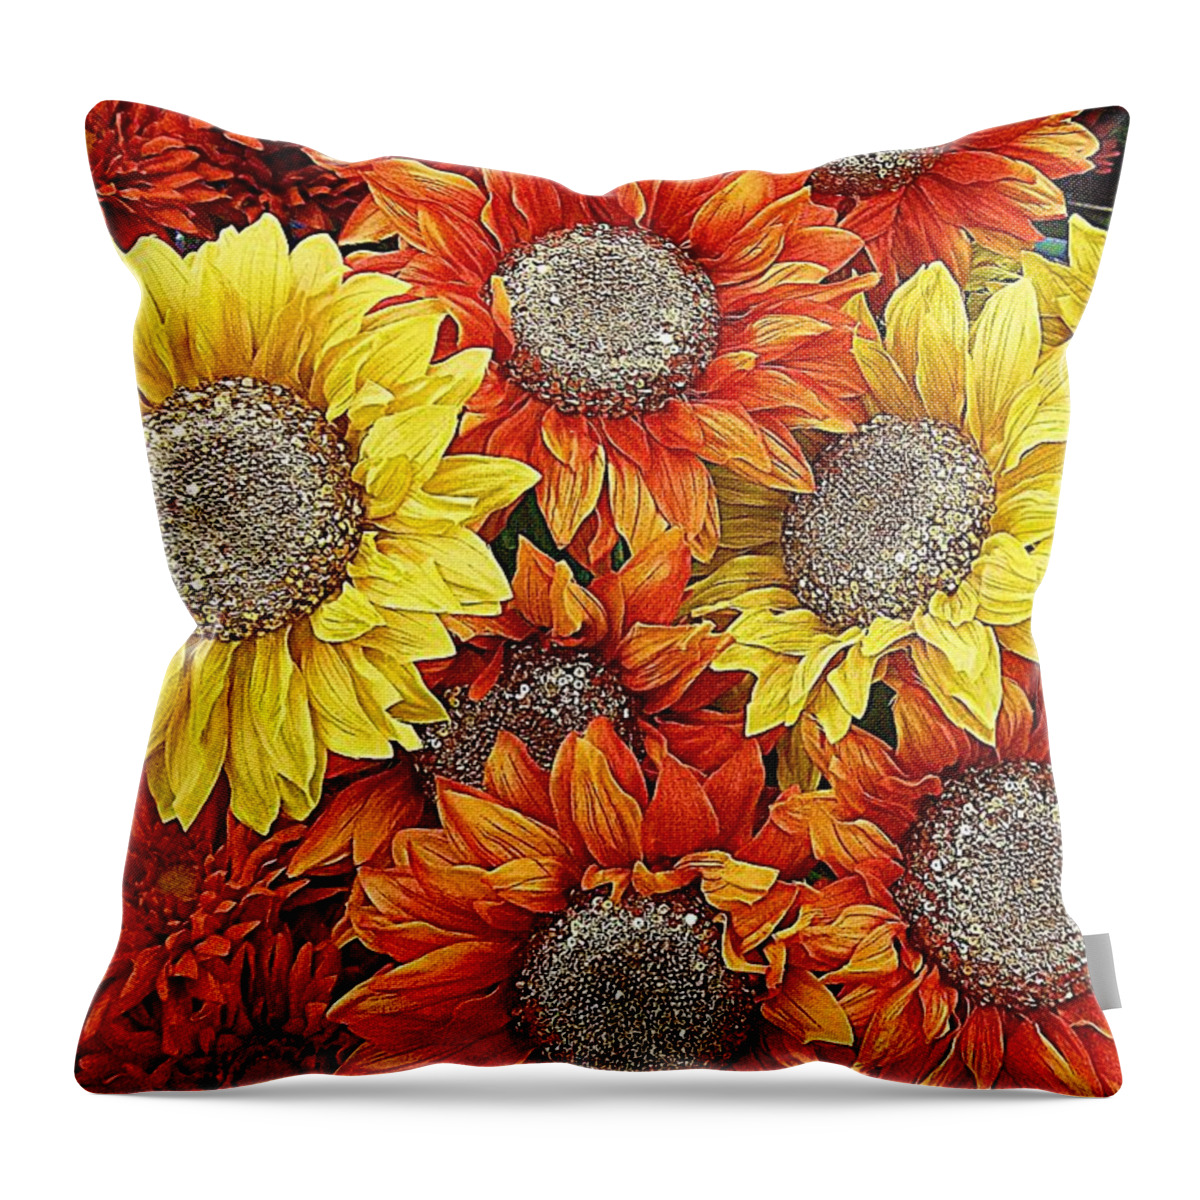 Daisy Fall Bunches Throw Pillow featuring the photograph Daisy Fall Bunches I by Saundra Myles